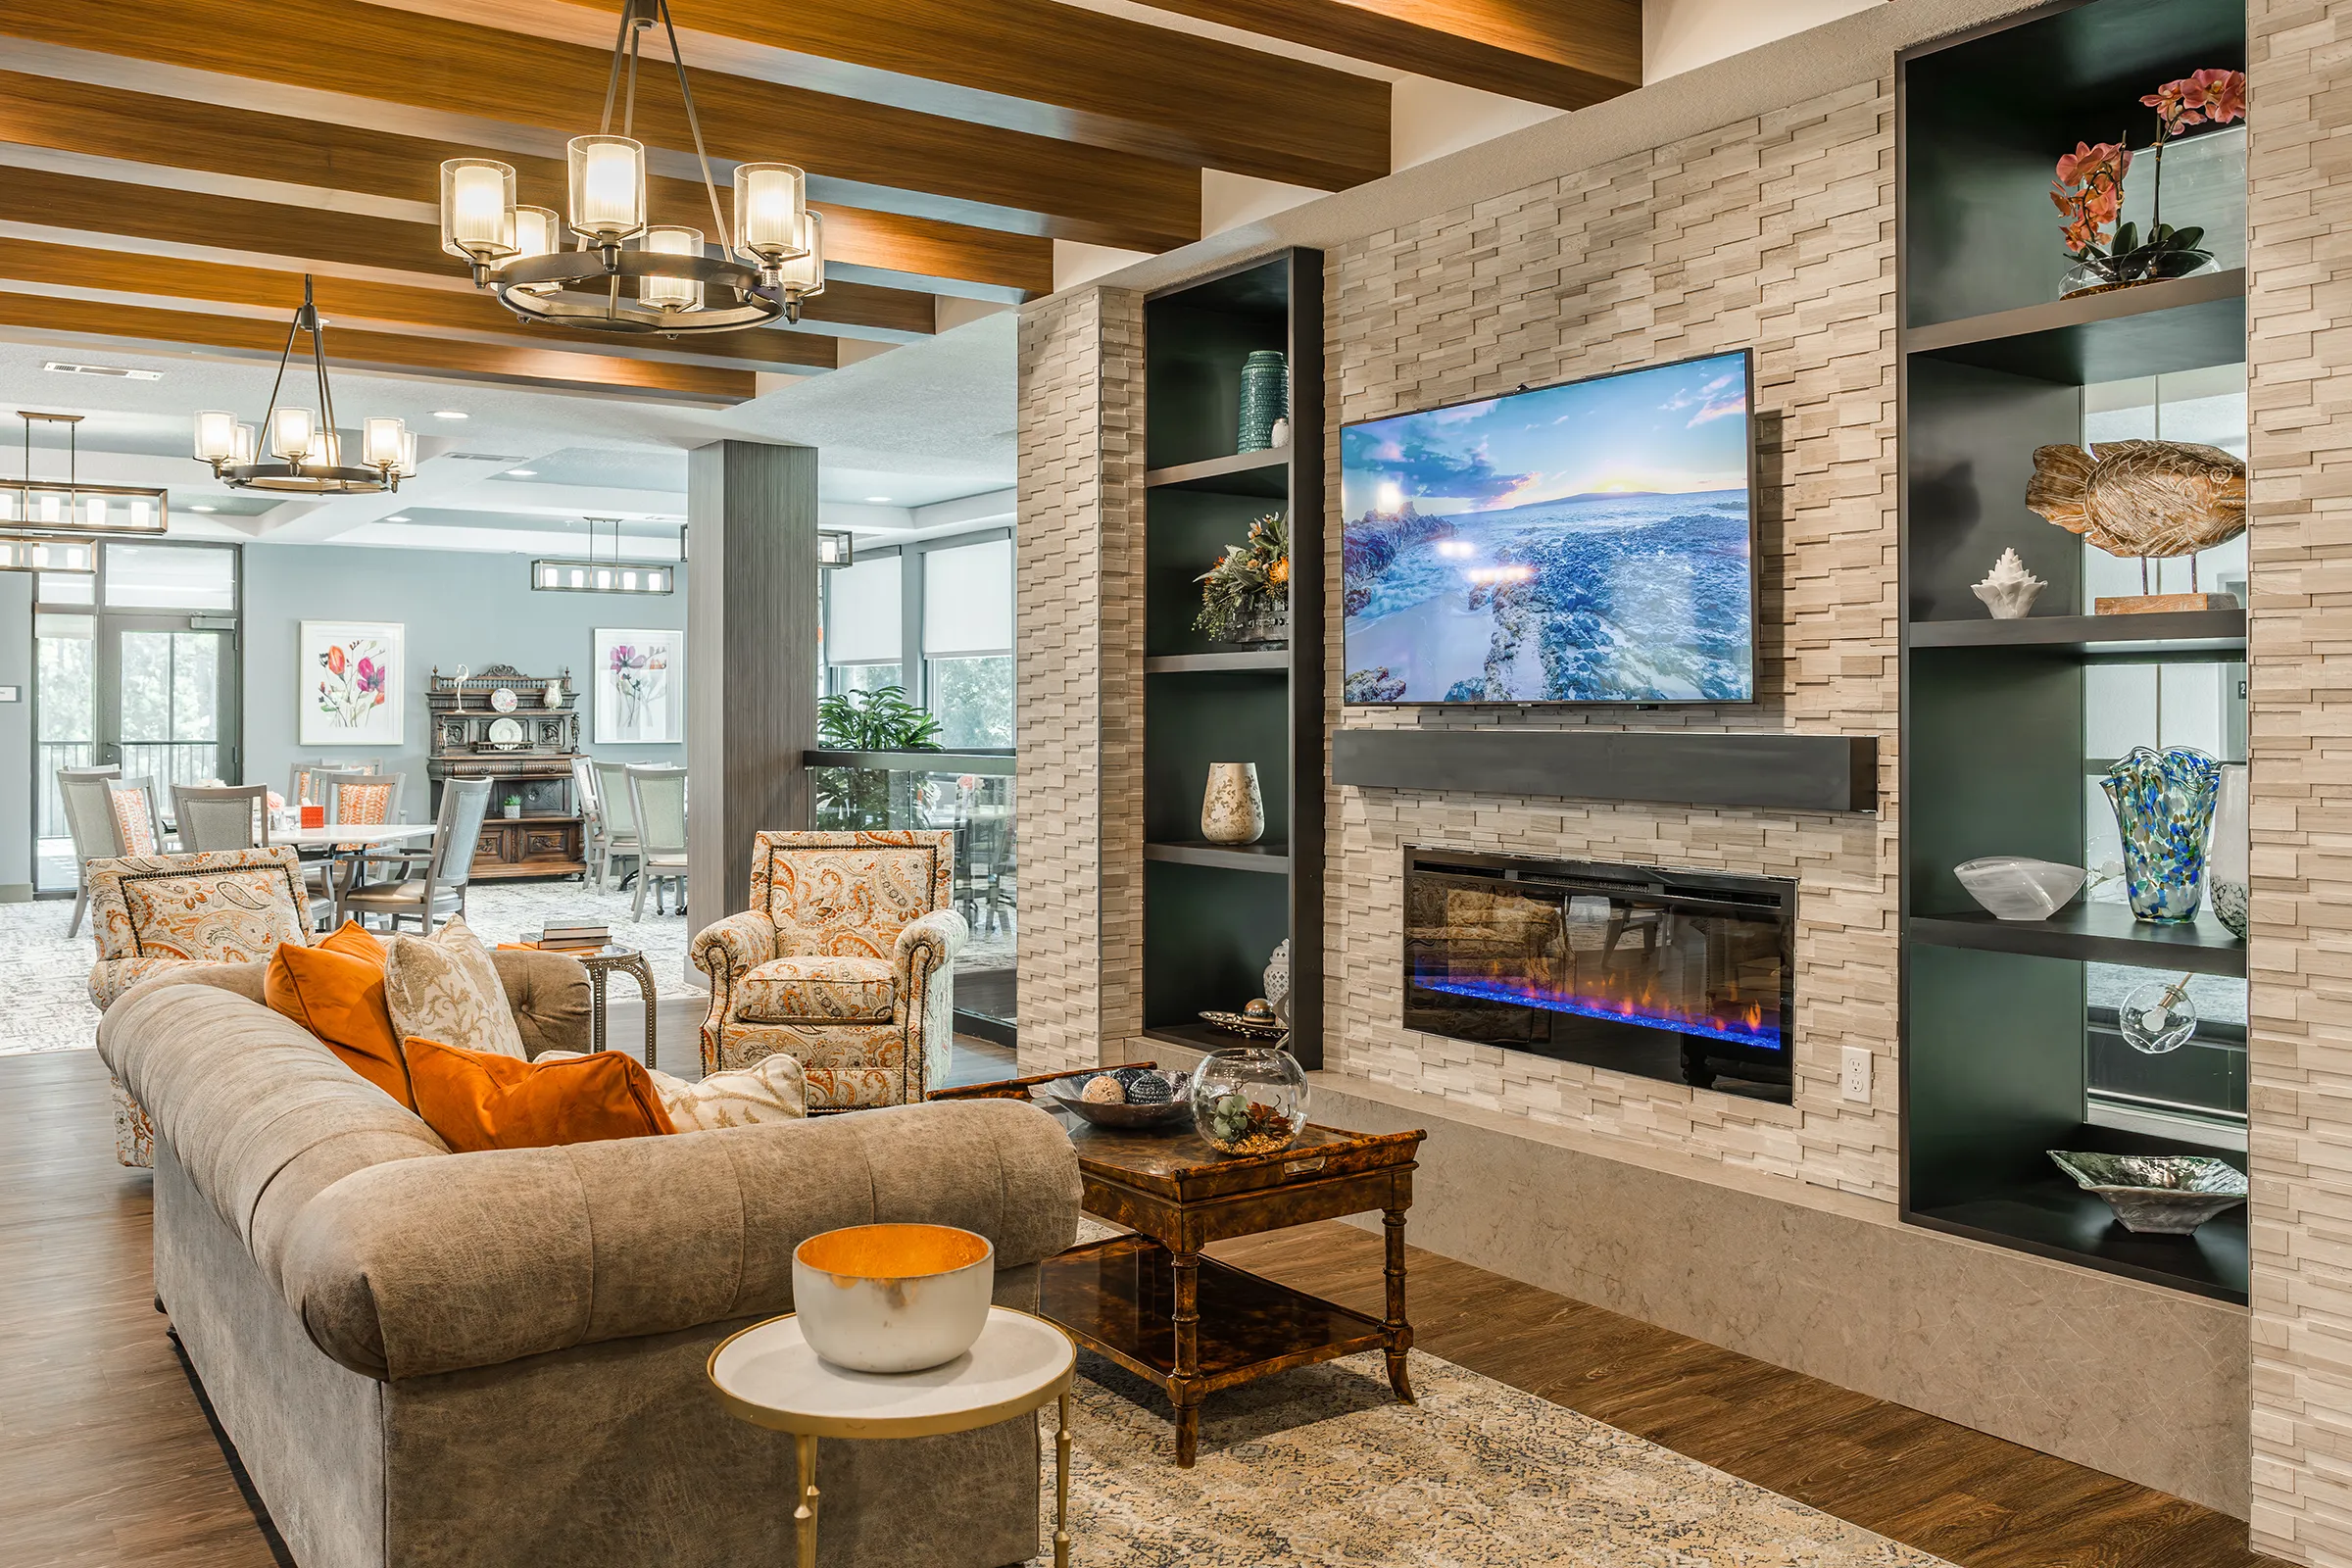 sitting area with fireplace and television